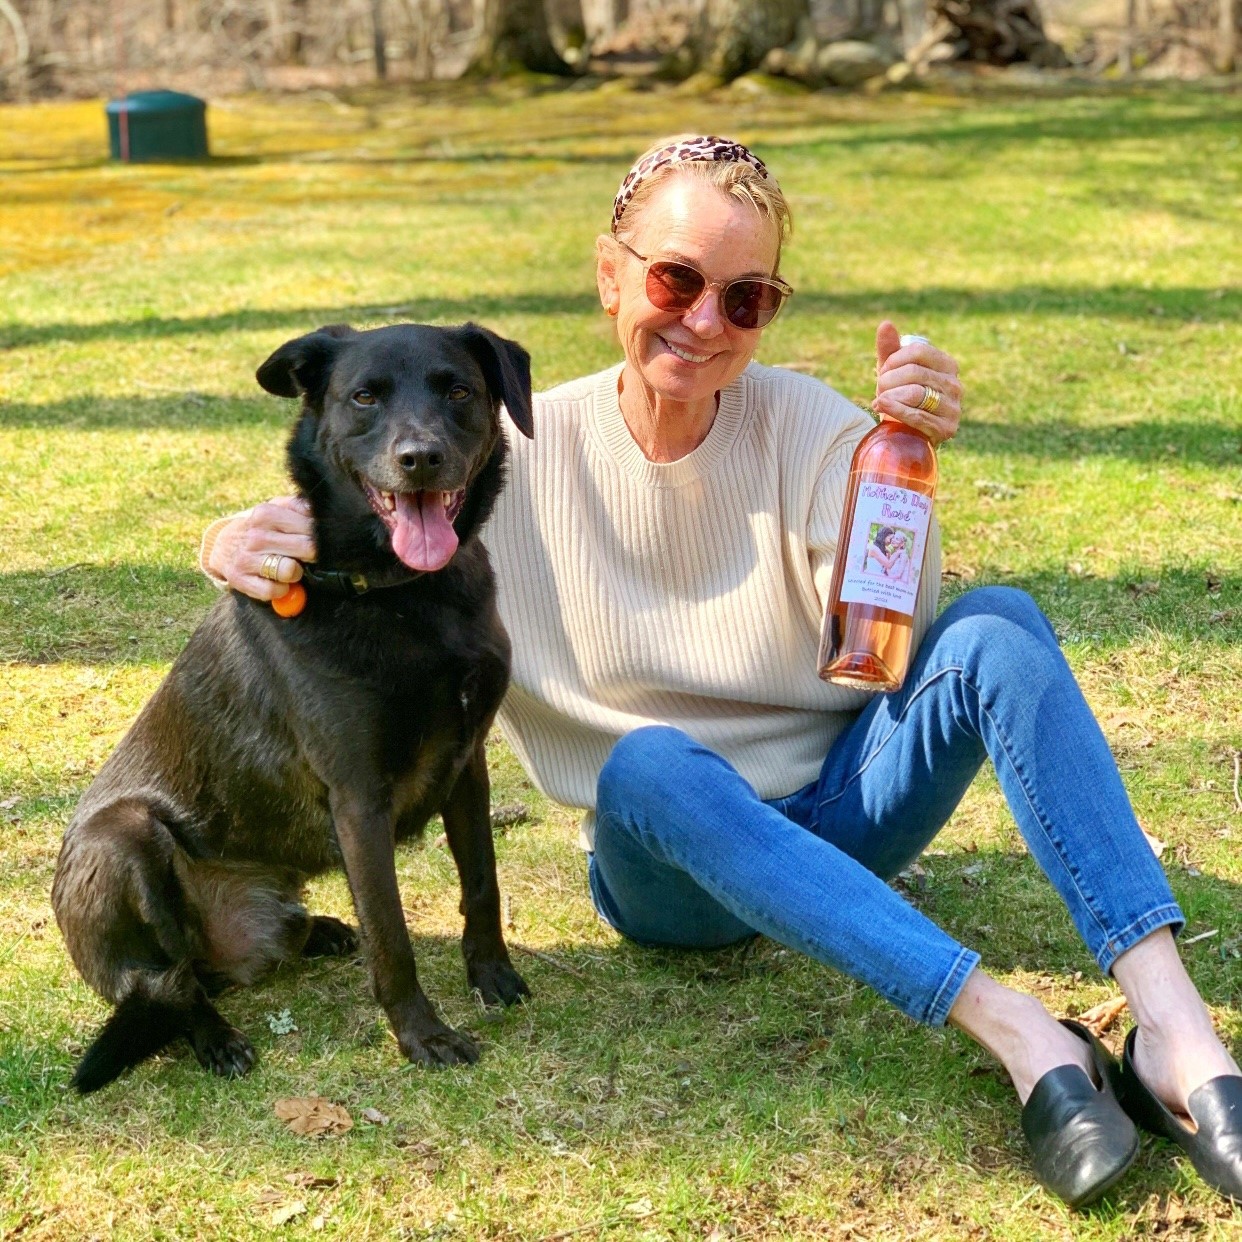 DIY mother's day gifts with a woman holding a personalized wine bottle while sitting next to a dog outside.